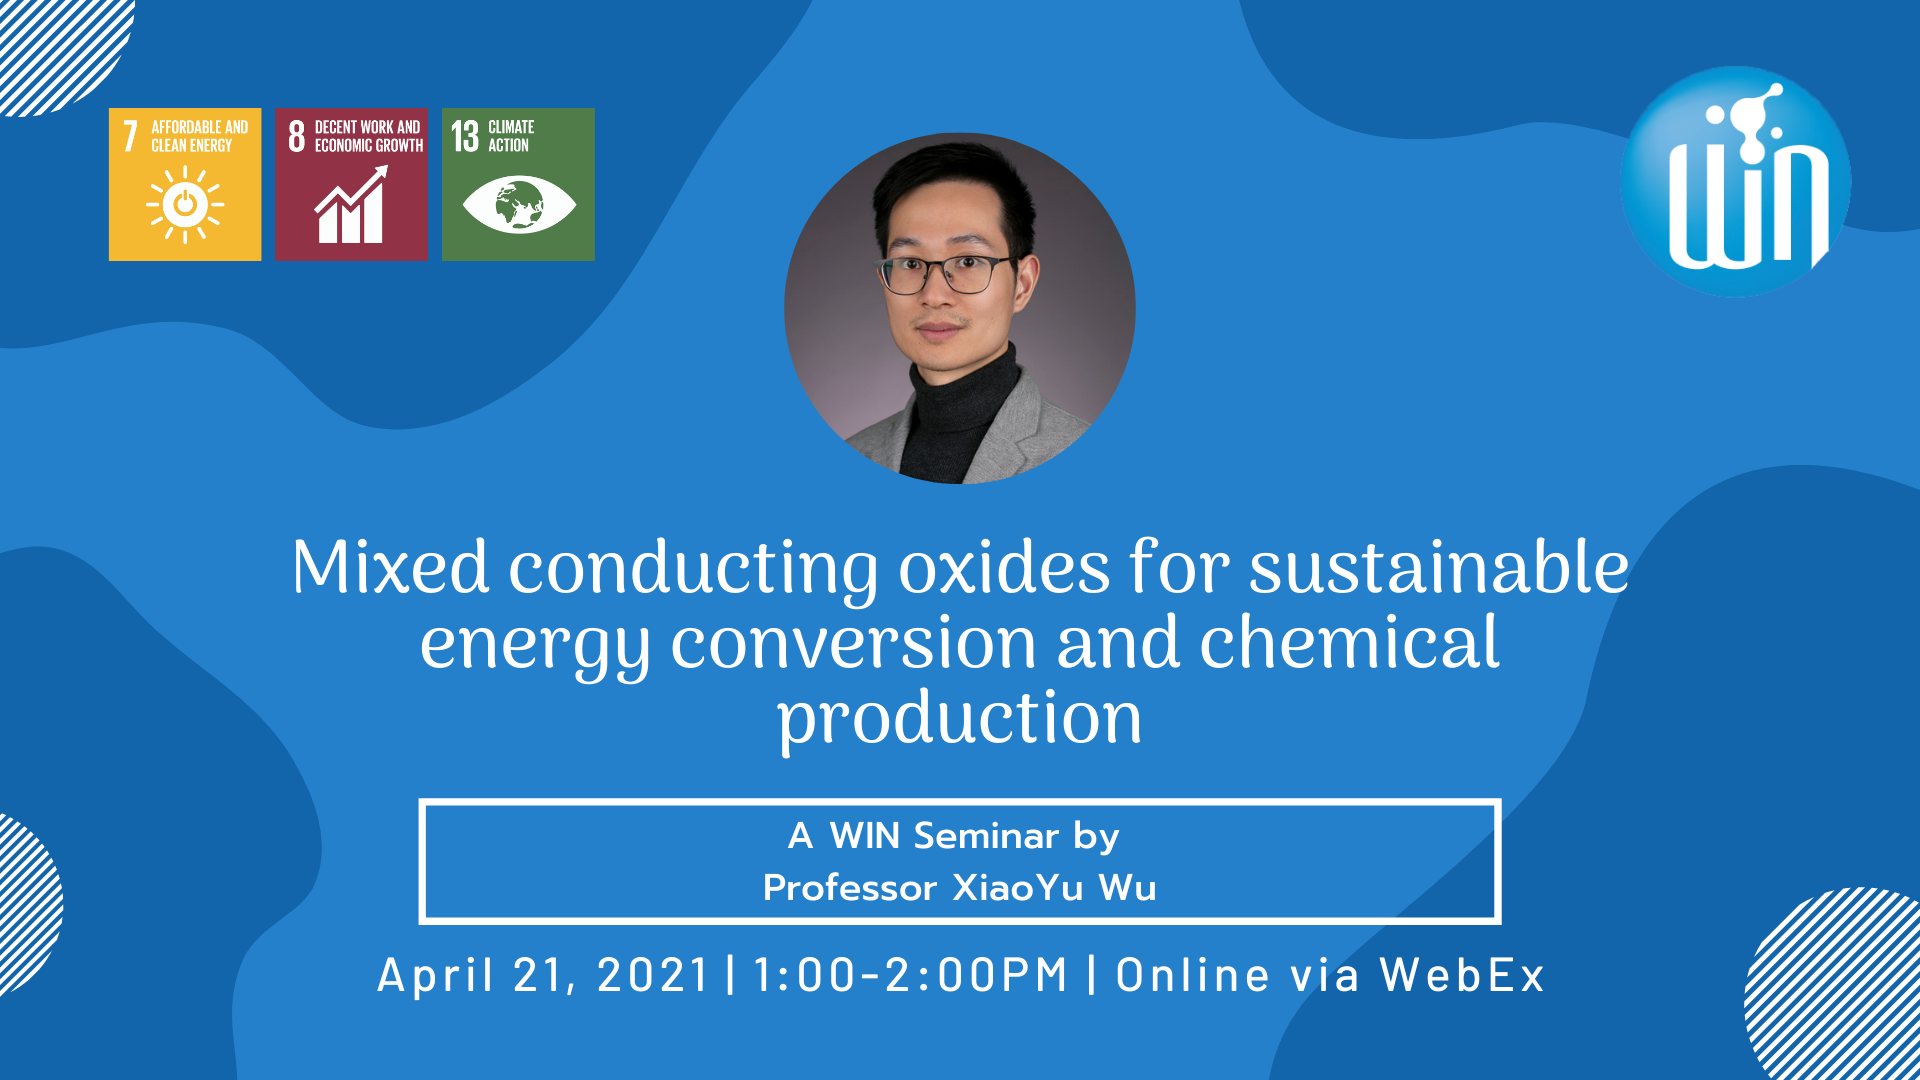 Mixed conducting oxides for sustainable energy conversion and chemical production a WIN seminar by professor XiaoYu Wu